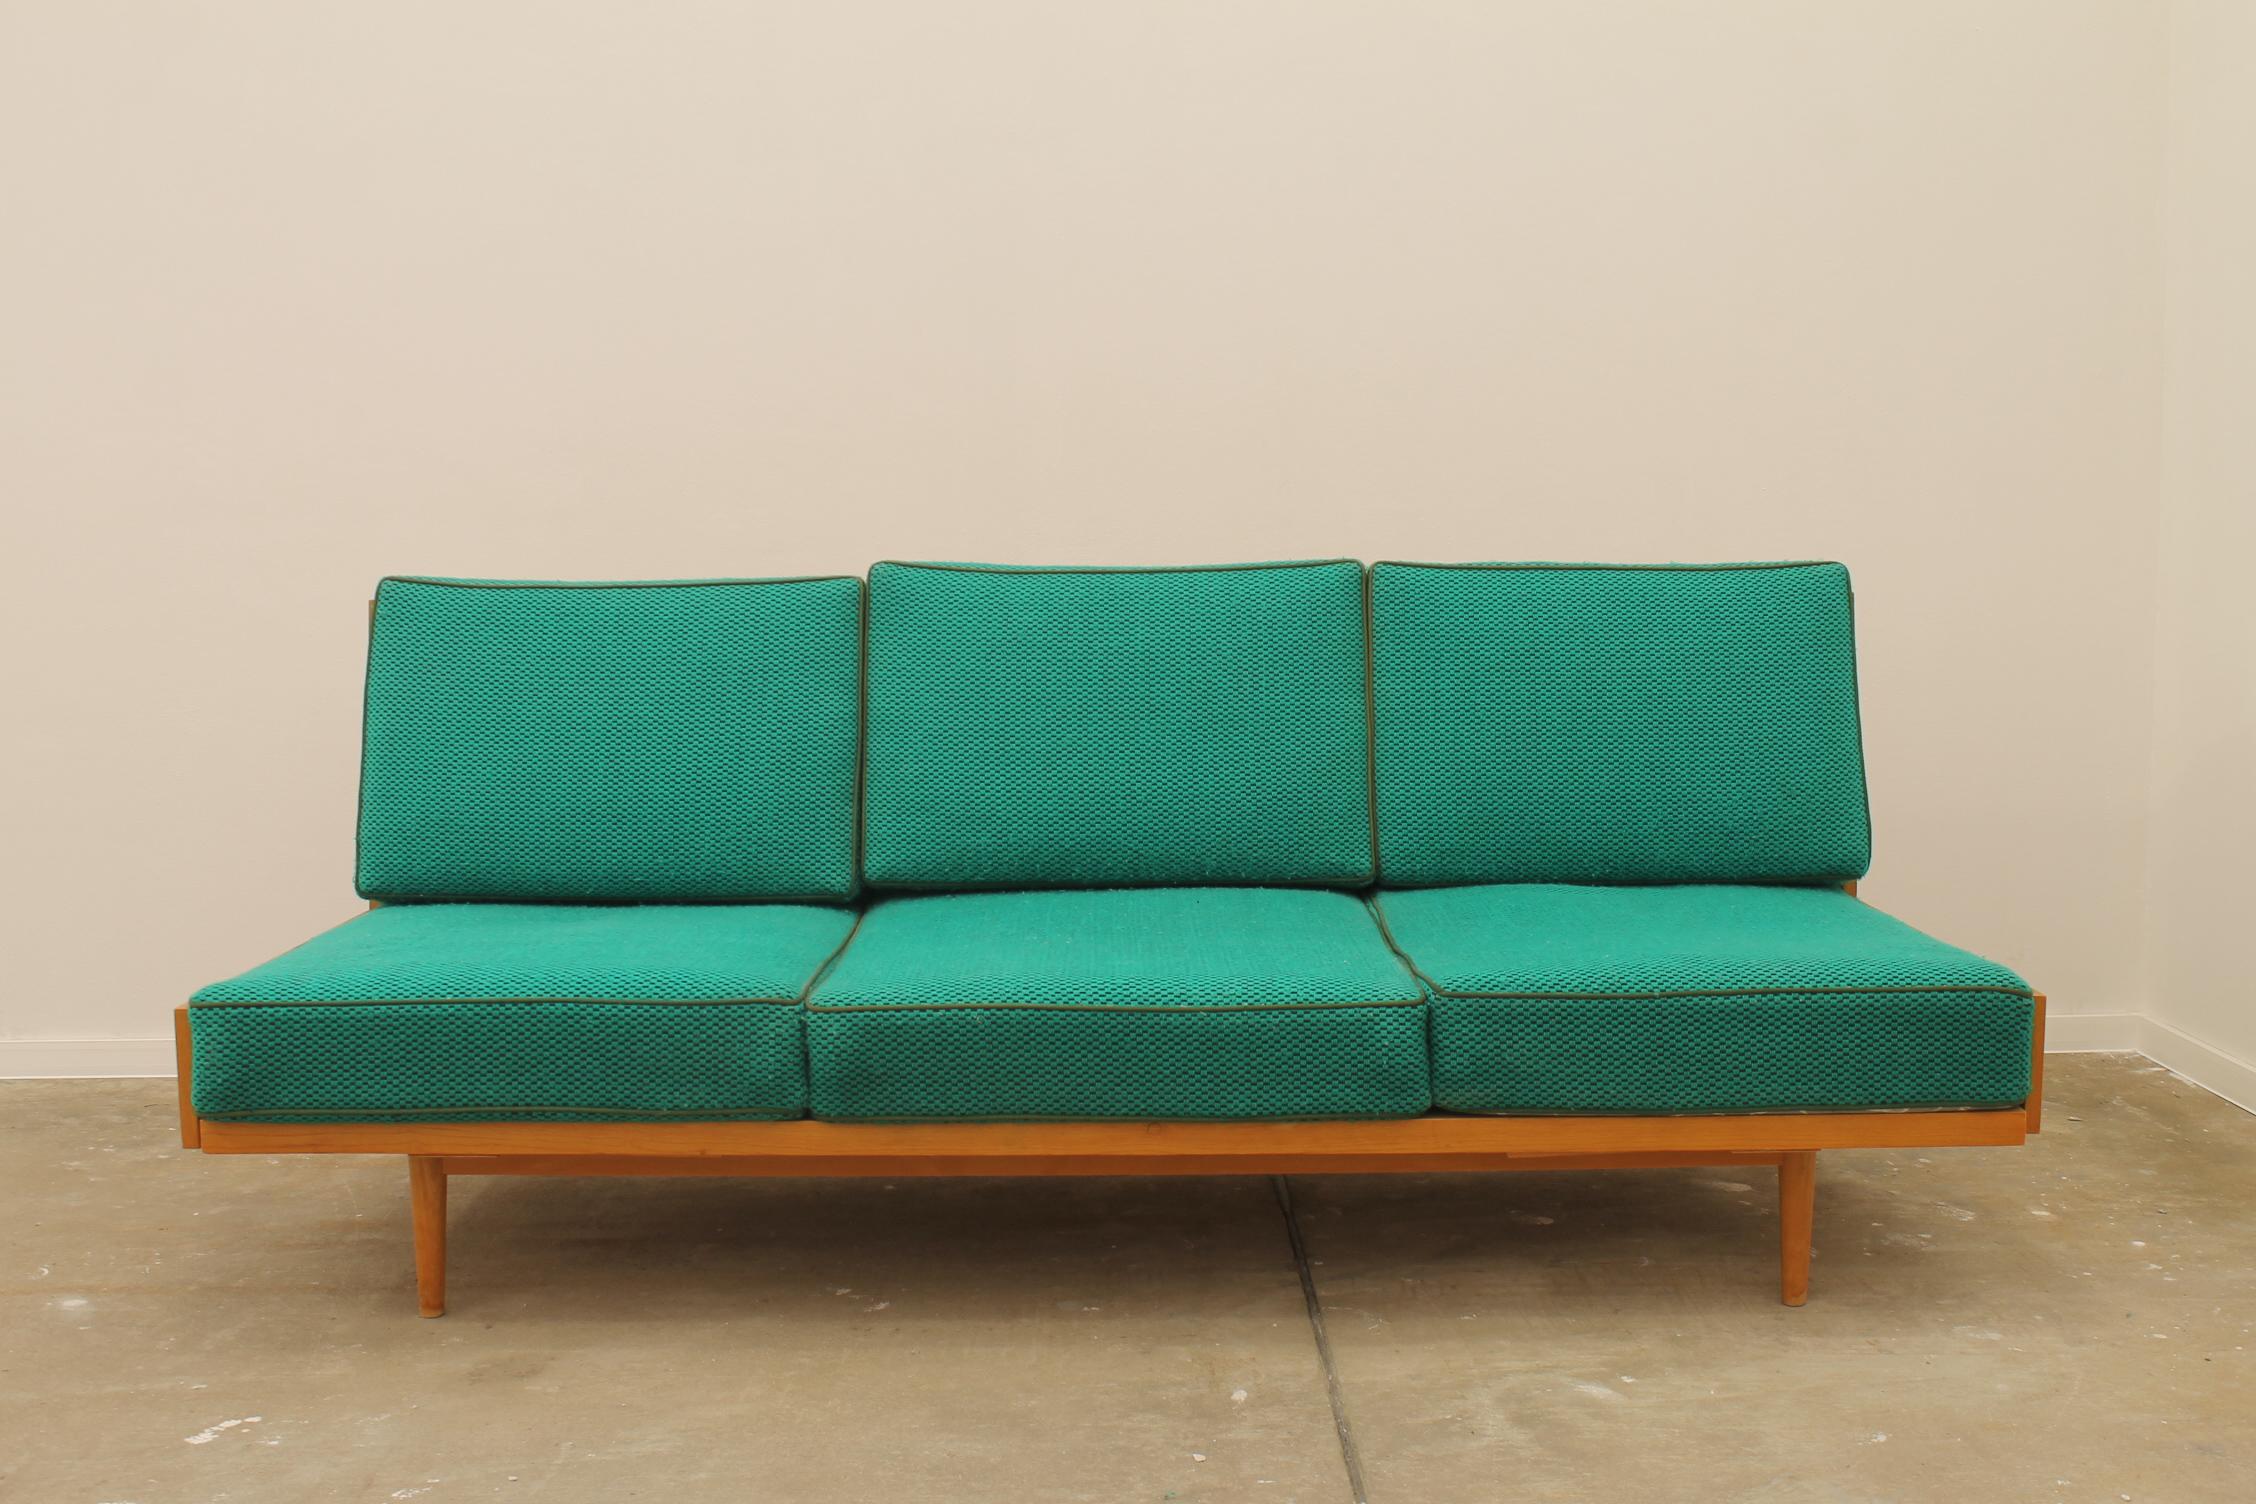 Midcentury sofa bed, made in the former Czechoslovakia in the 1970s. The sofa has a beechwood structure, it´s in very good condition, shows slight signs of age and using.

Lenght: 200 cm

Height: 78 cm
Depth: 85 cm

Sleeping area: 128 x 196